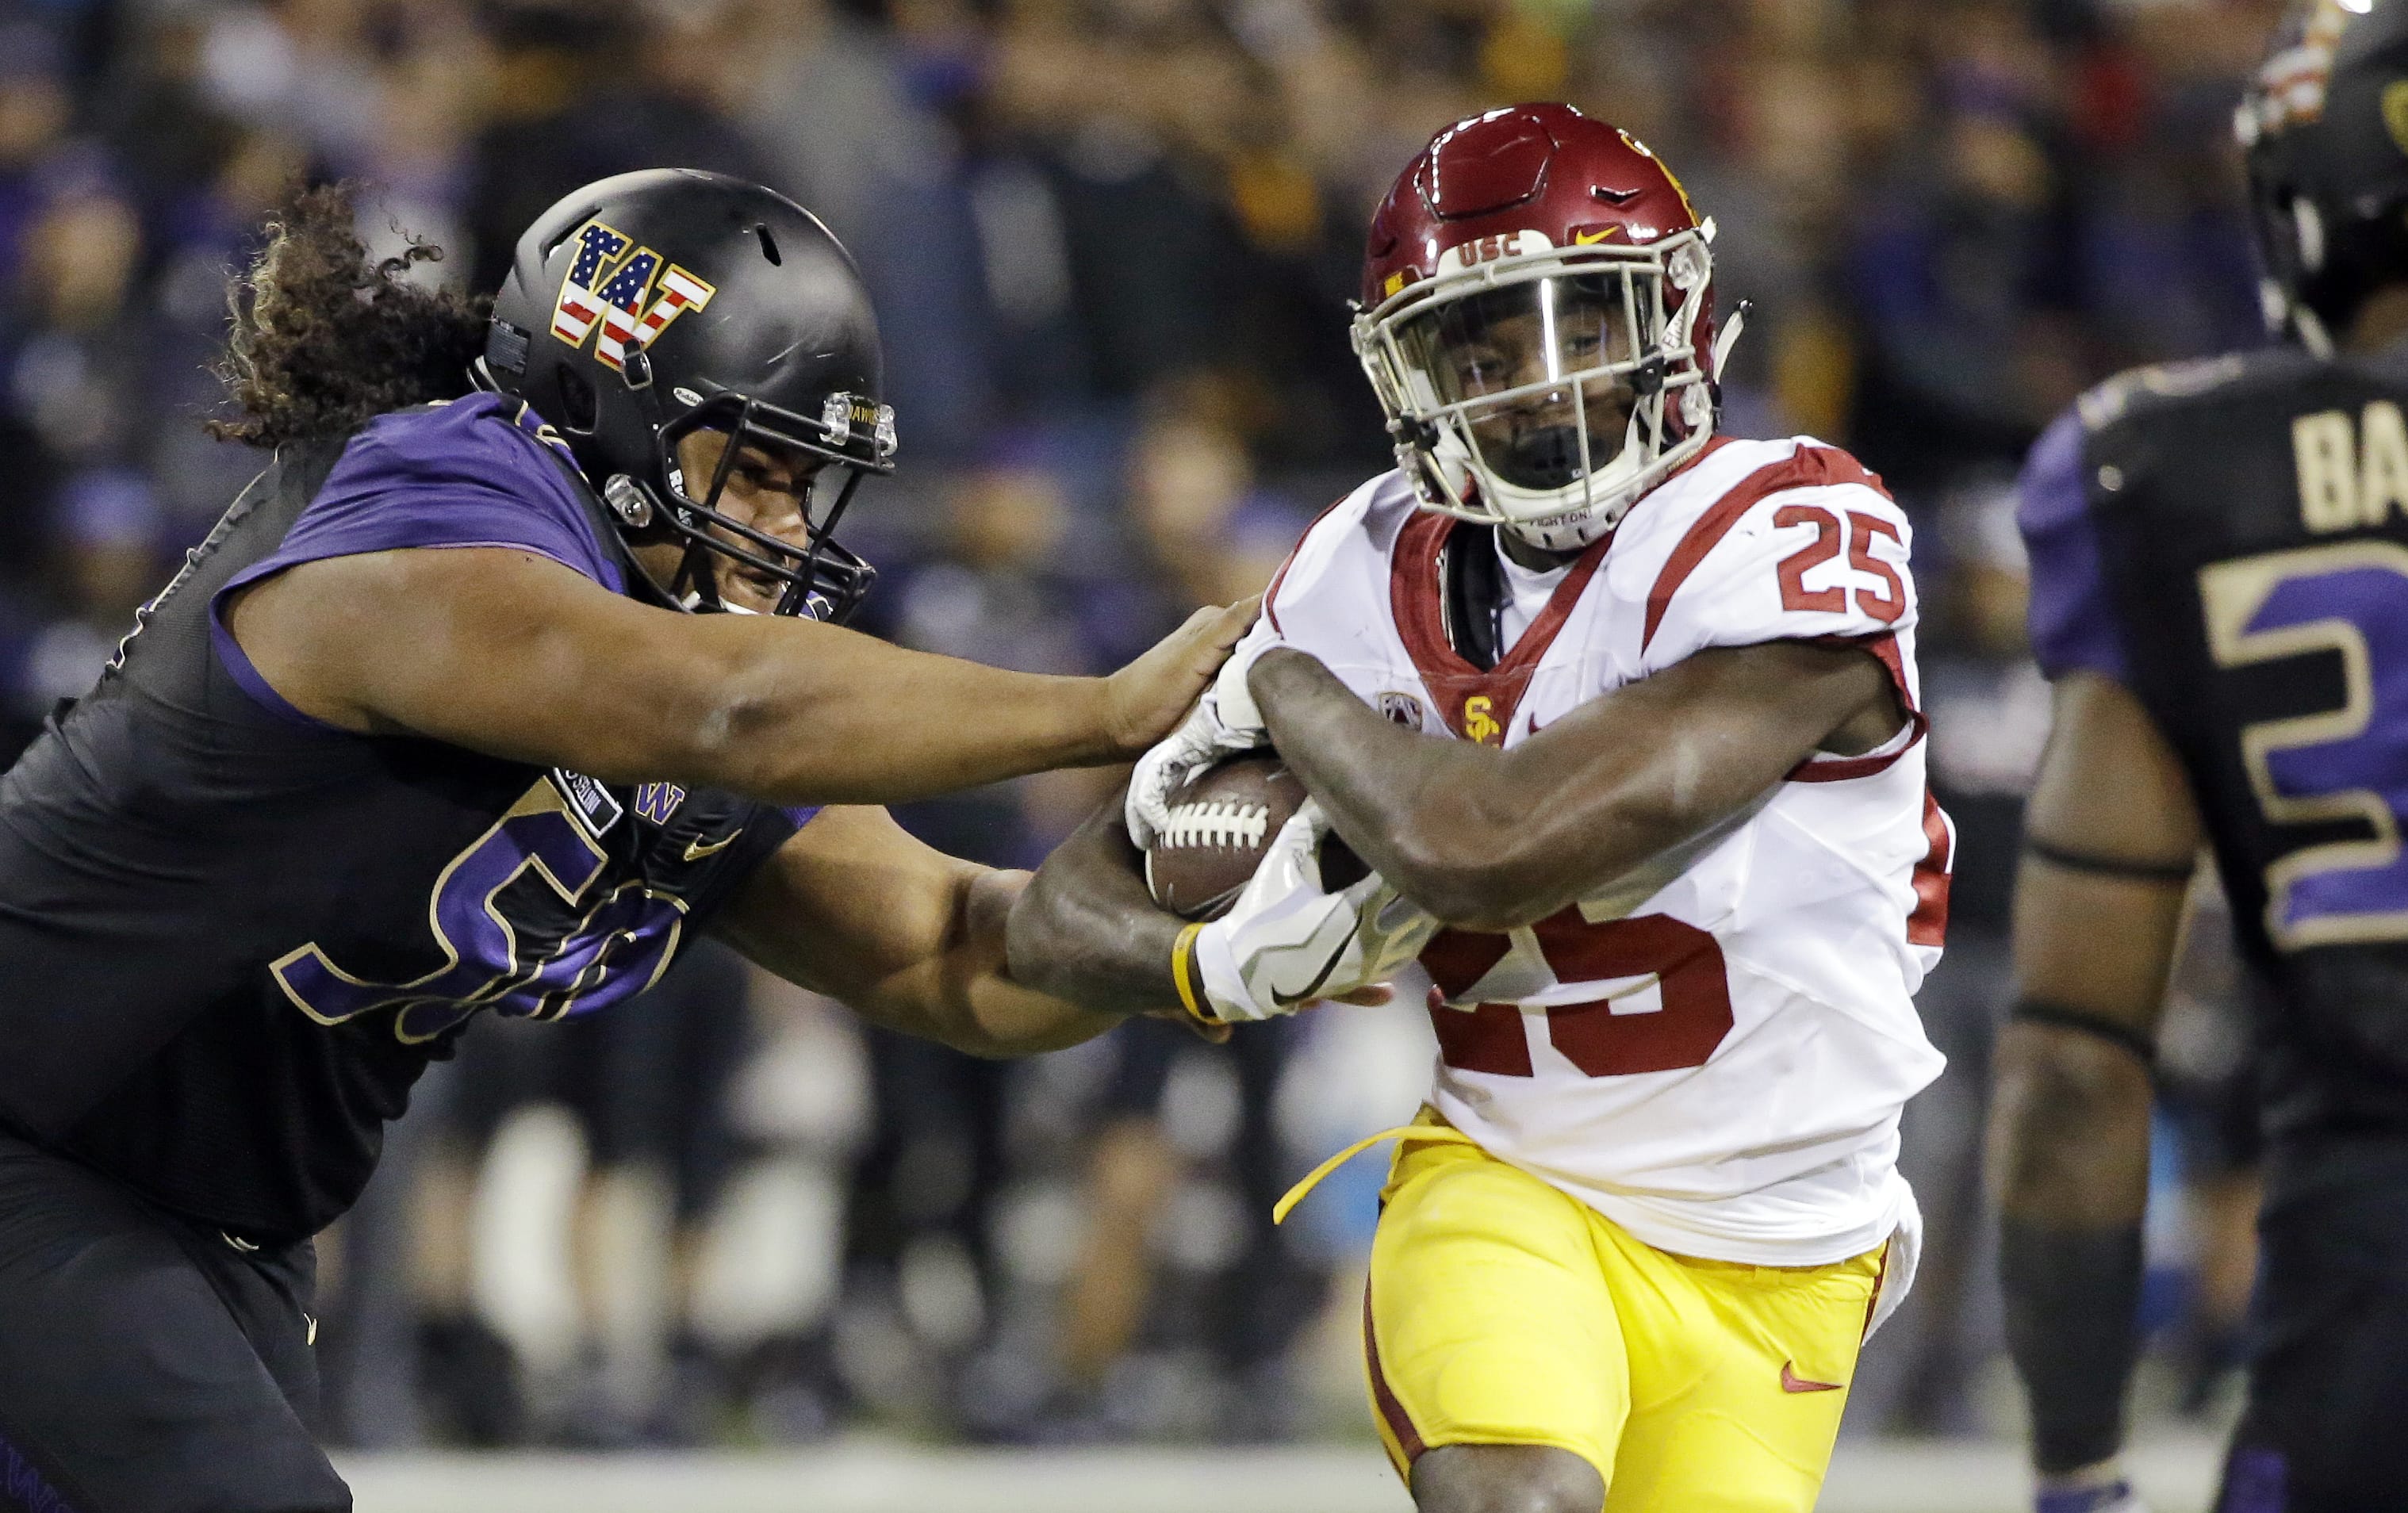 Washington defensive lineman Vita Vea, left, pushes Southern California running back Ronald Jones II on a carry by Jones in the first half of an NCAA college football game Saturday, Nov. 12, 2016, in Seattle.